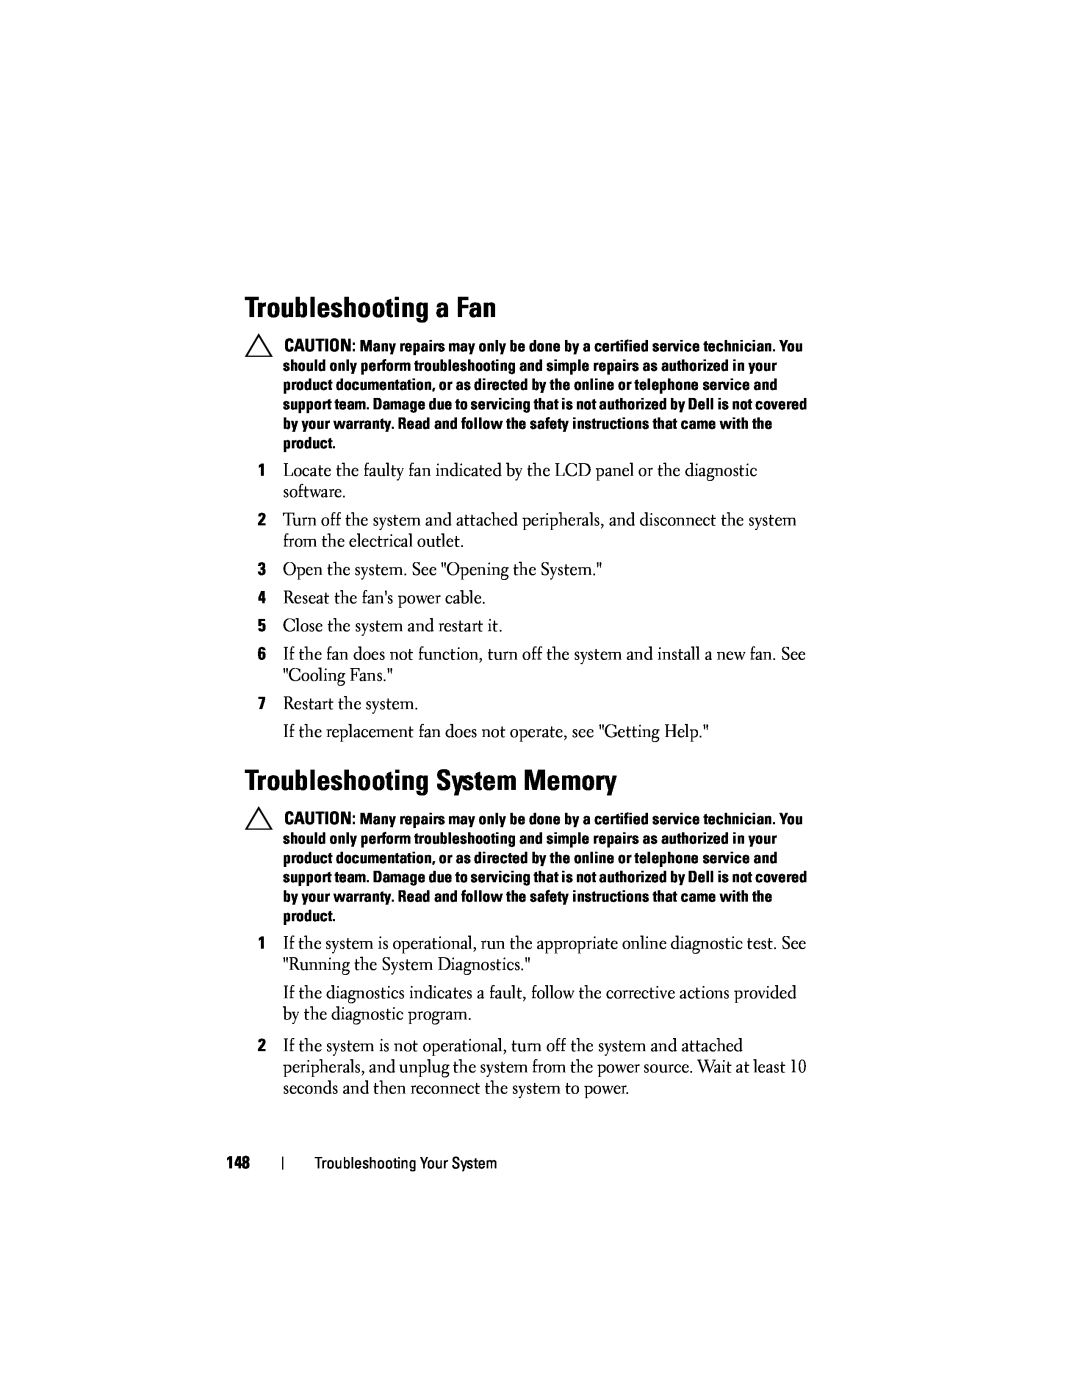 Dell R610 owner manual Troubleshooting a Fan, Troubleshooting System Memory 